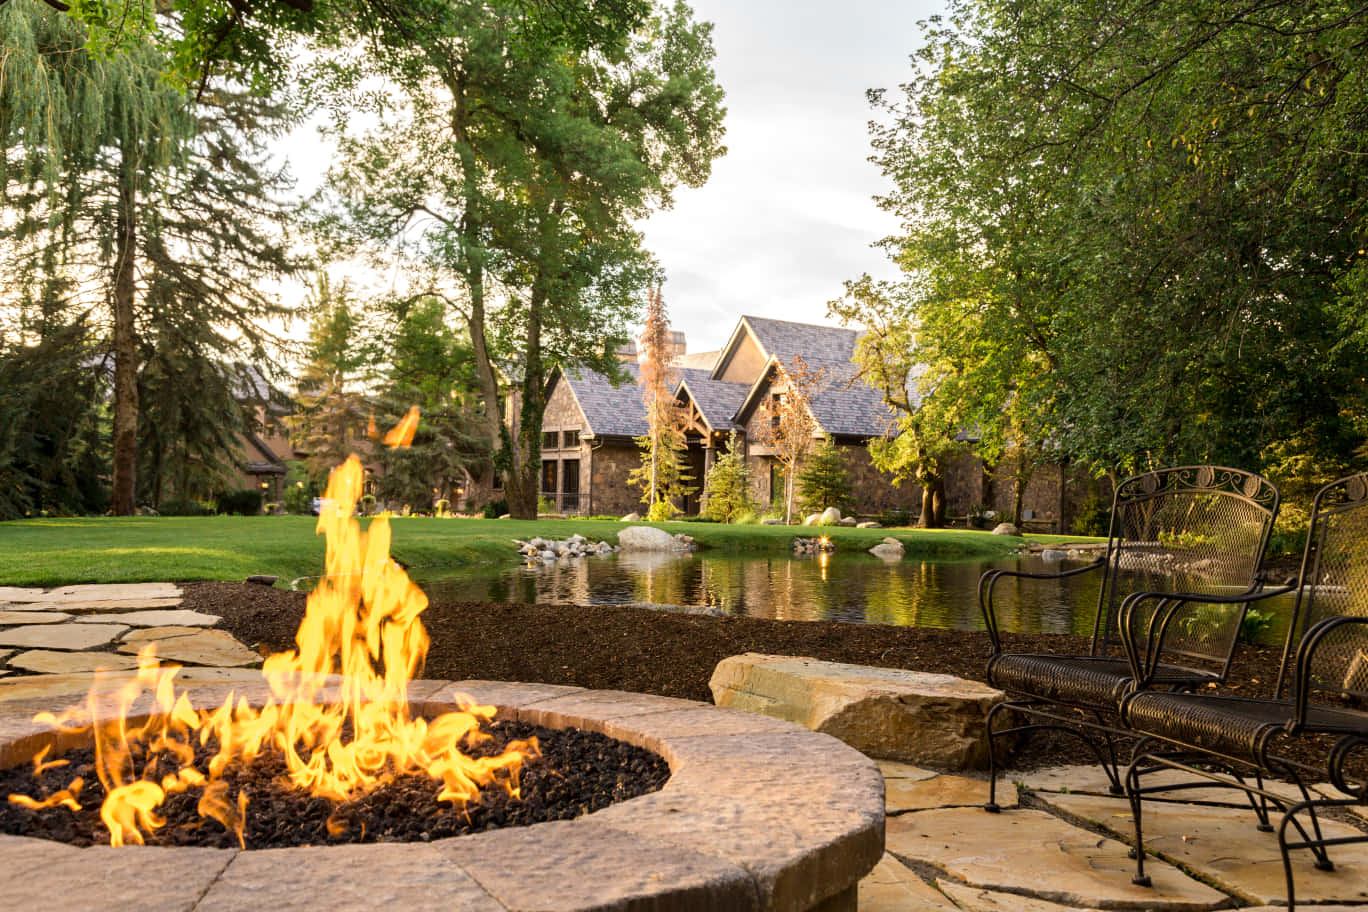 A Fire Pit In A Backyard With A Pond